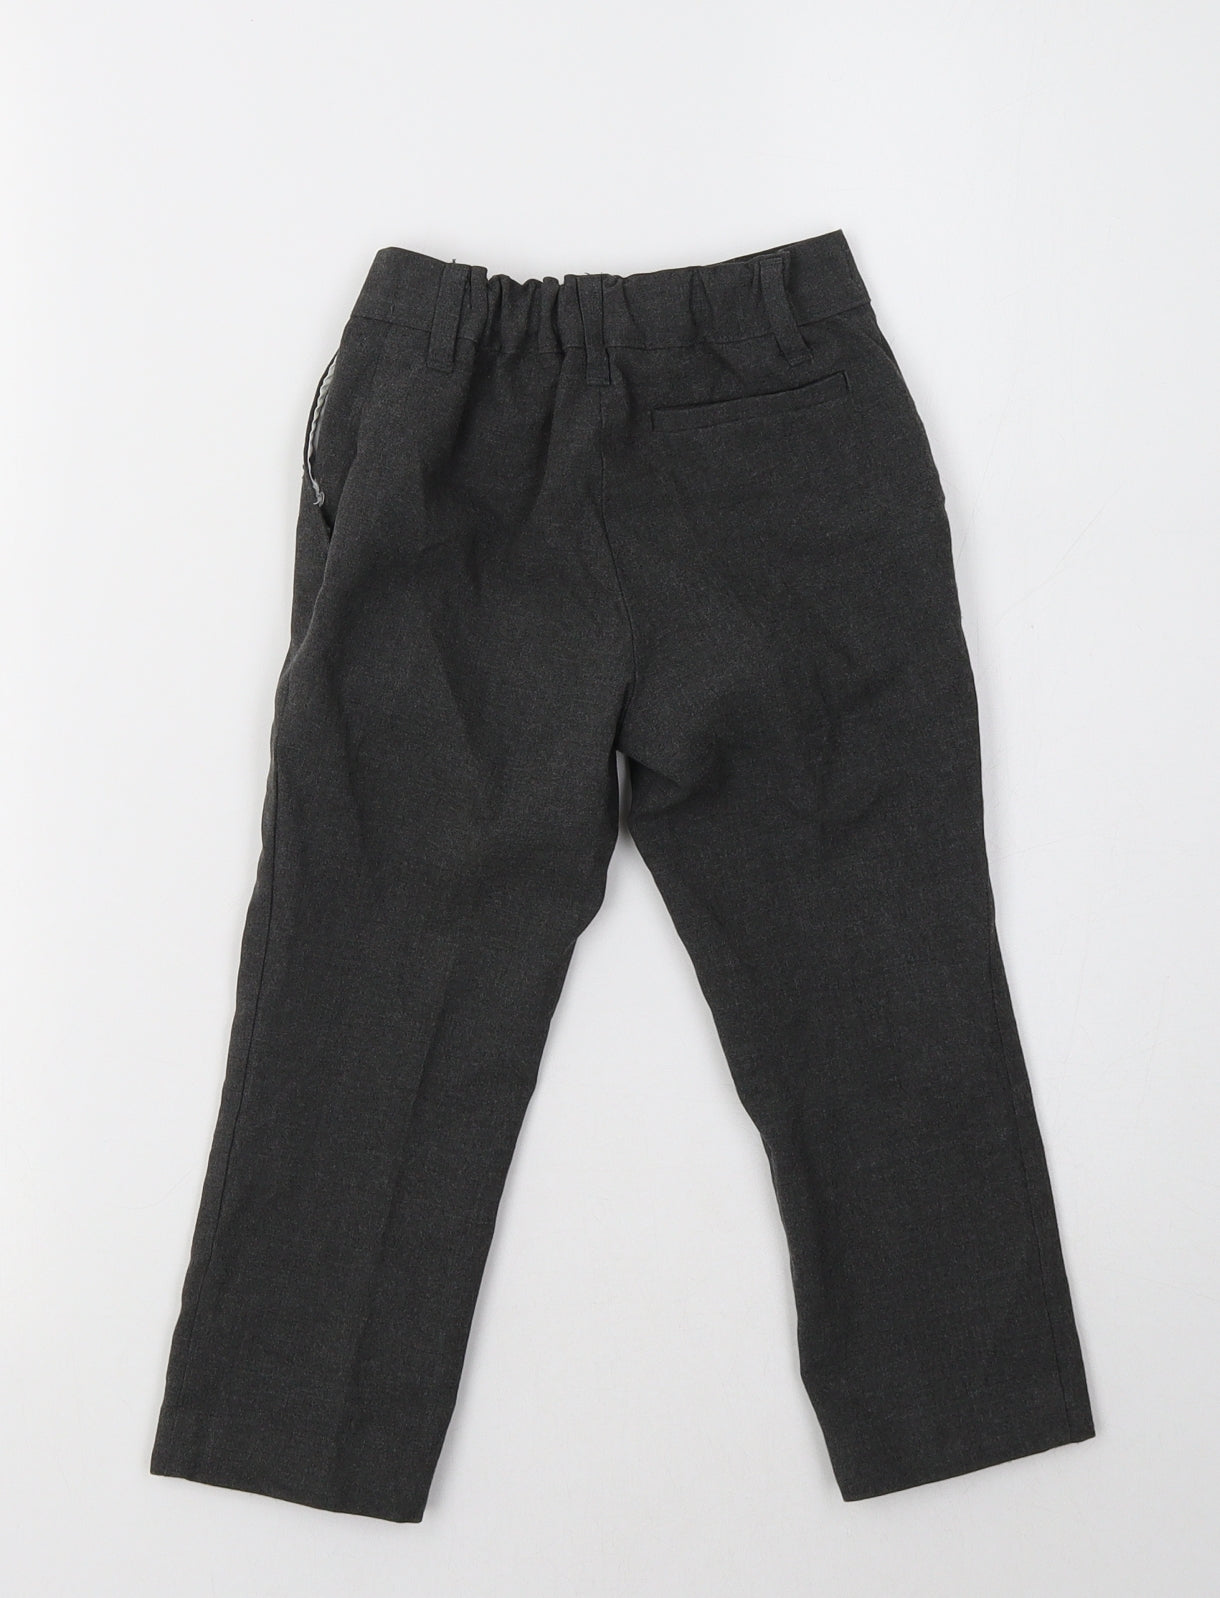 M&S Boys Grey  Polyester Dress Pants Trousers Size 2-3 Years  Regular